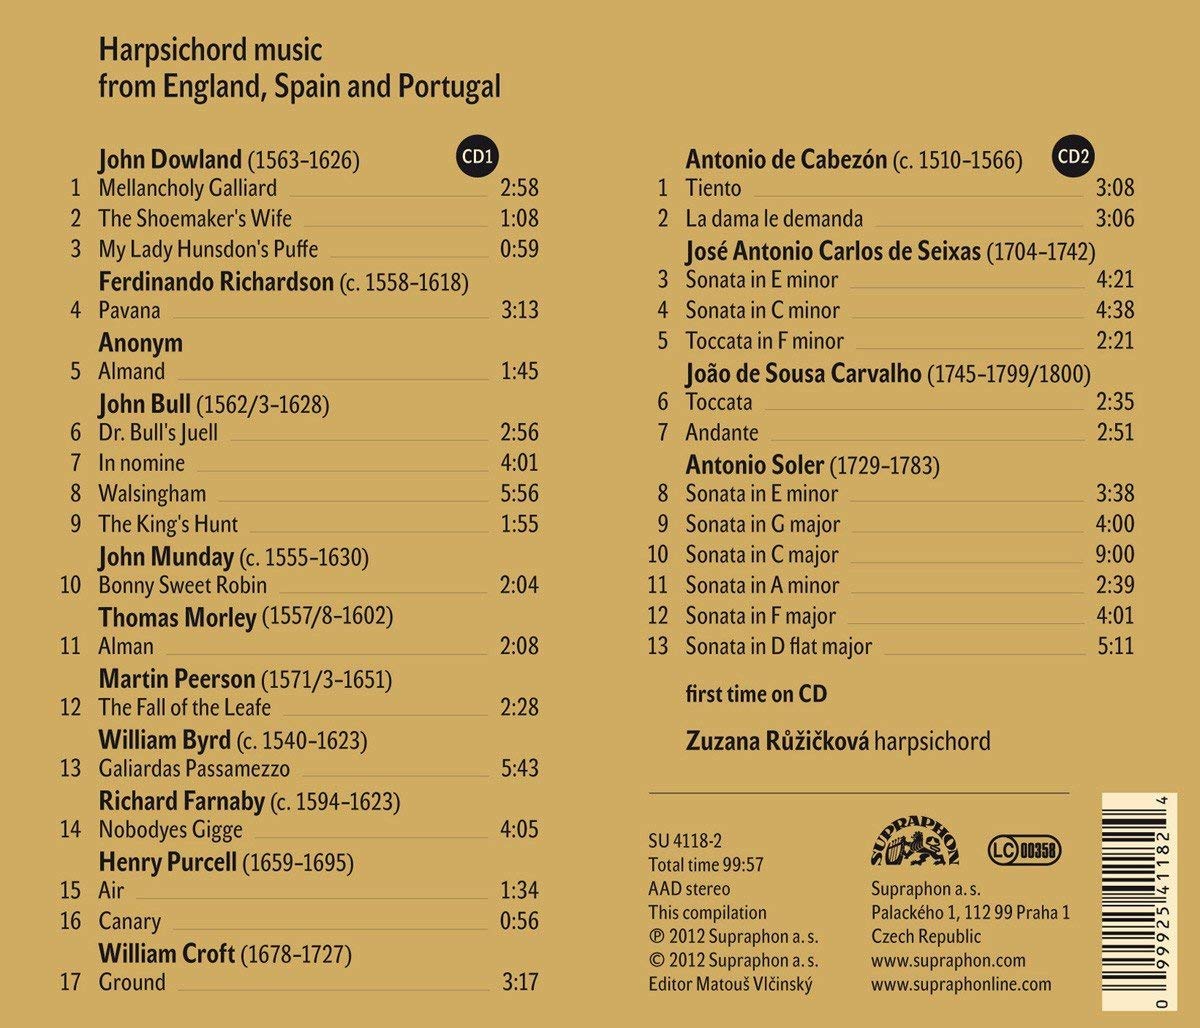 Harpsichord Music of the 16th, 17th and 18th centuries from England, Spain and Portugal - slide-1